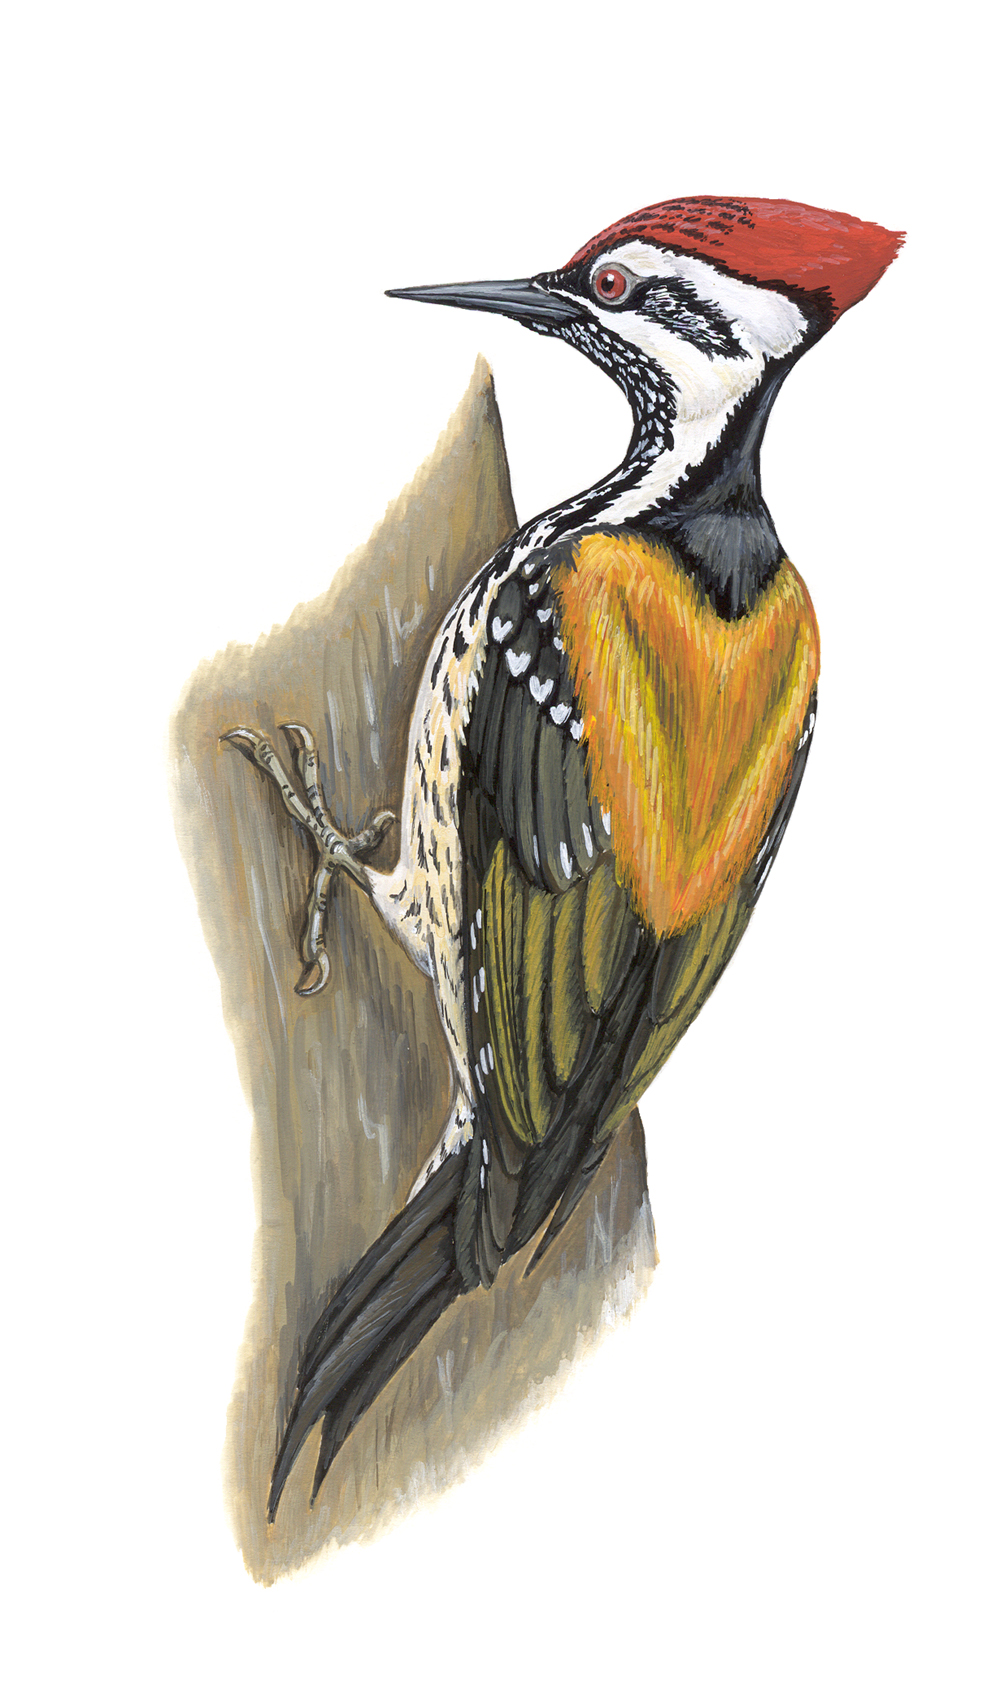 Pretty Lesser flame-backed woodpecker